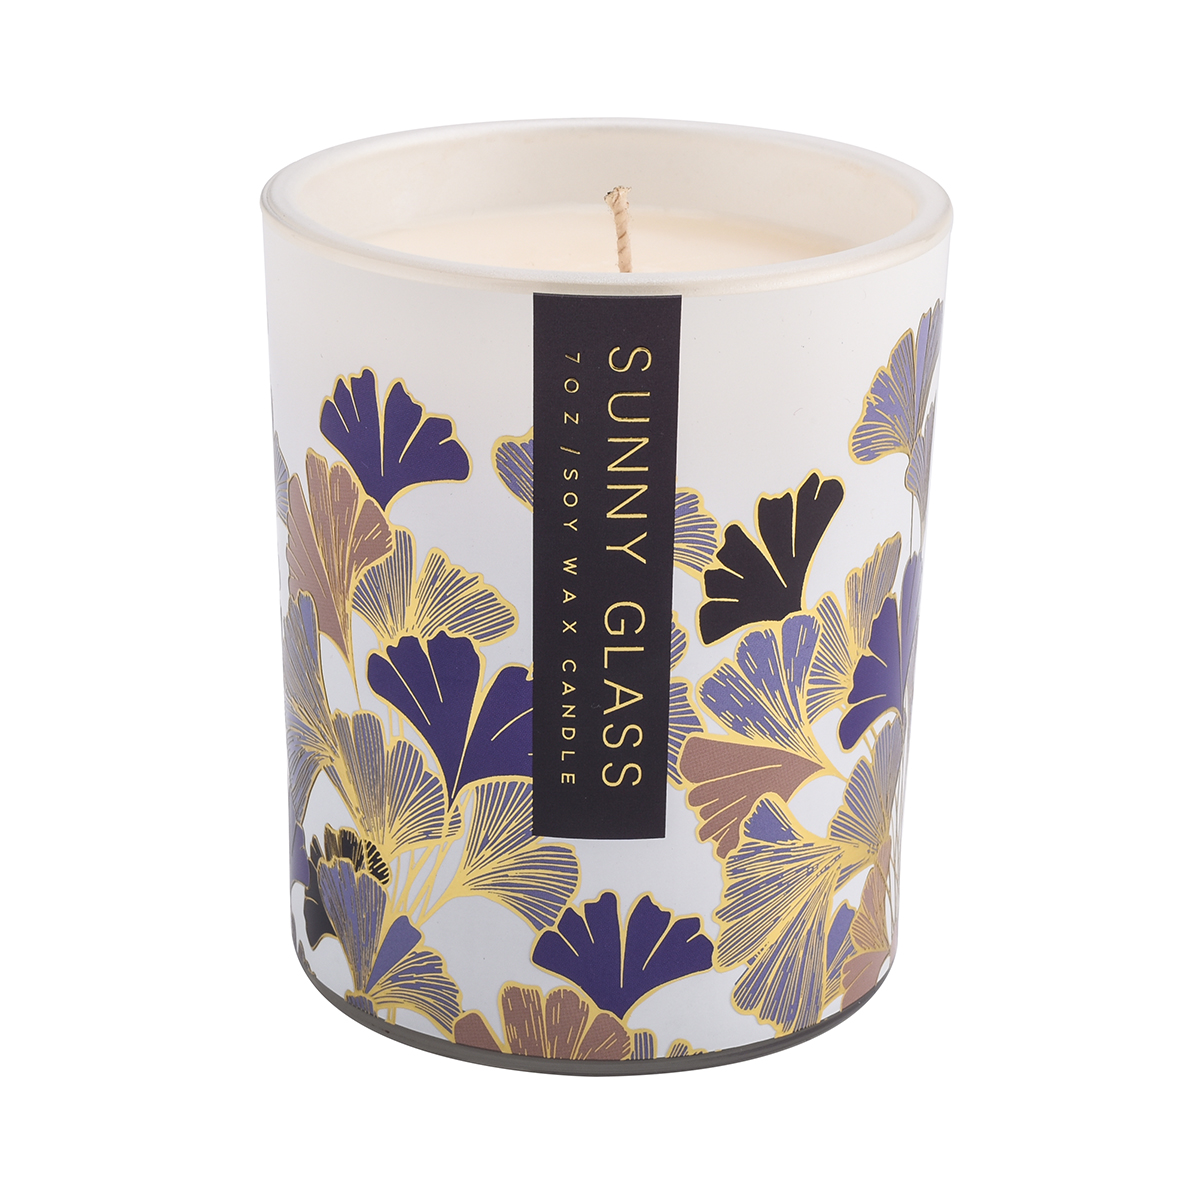 Luxury purple ginkgo leaf glass candle jar with colorful hand-crafted decals